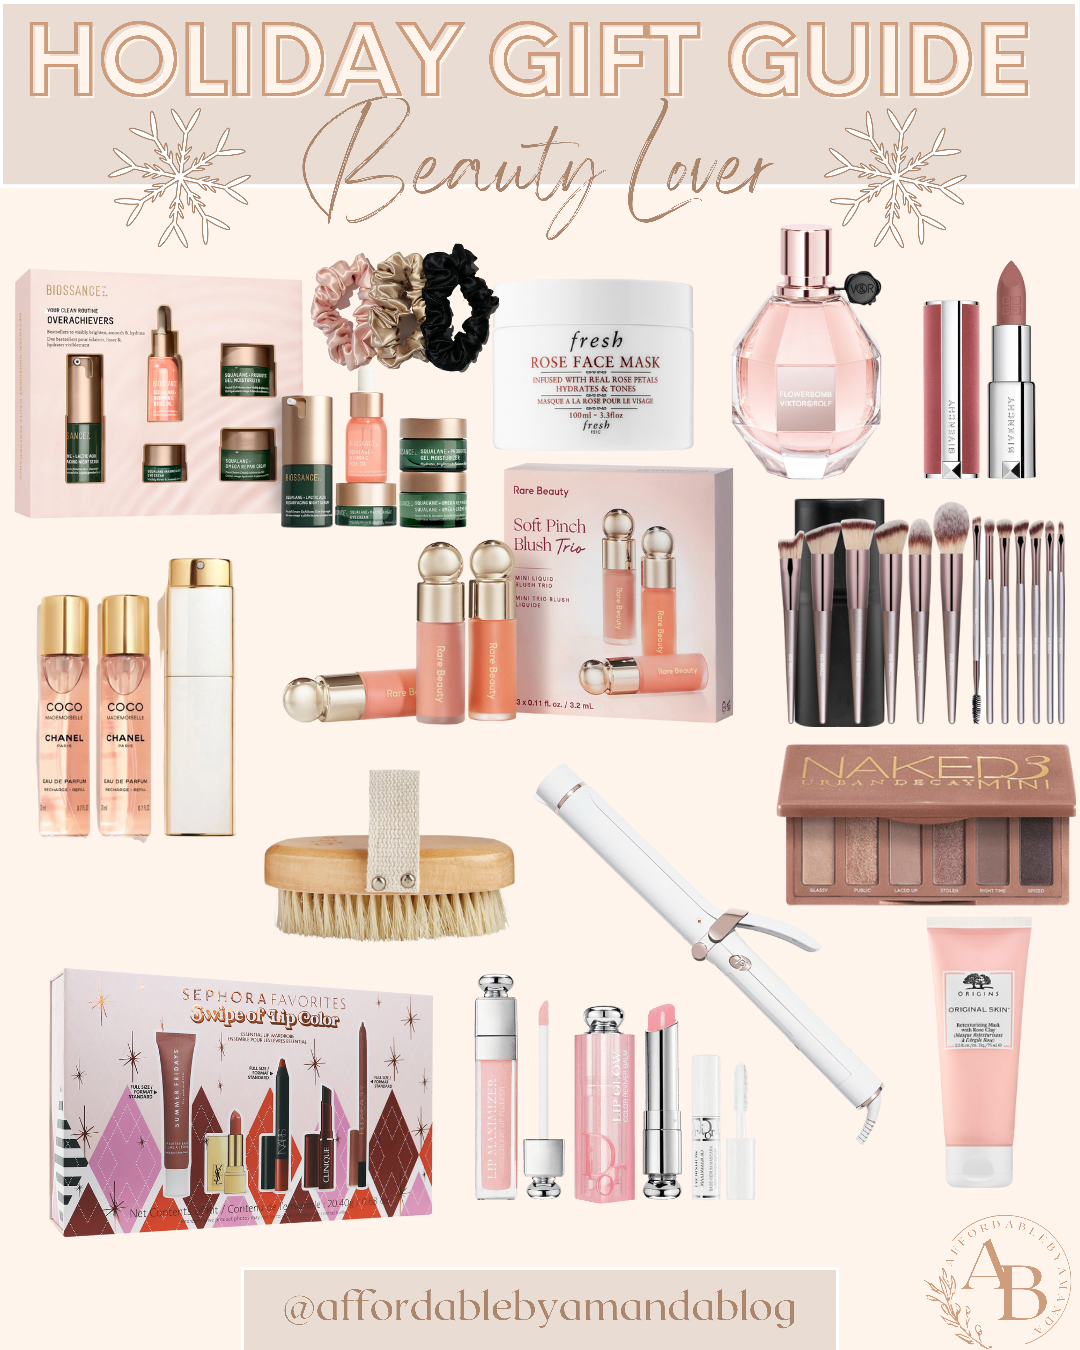 Holiday Gift Guide: Gifts for Beauty Lovers - Affordable by Amanda